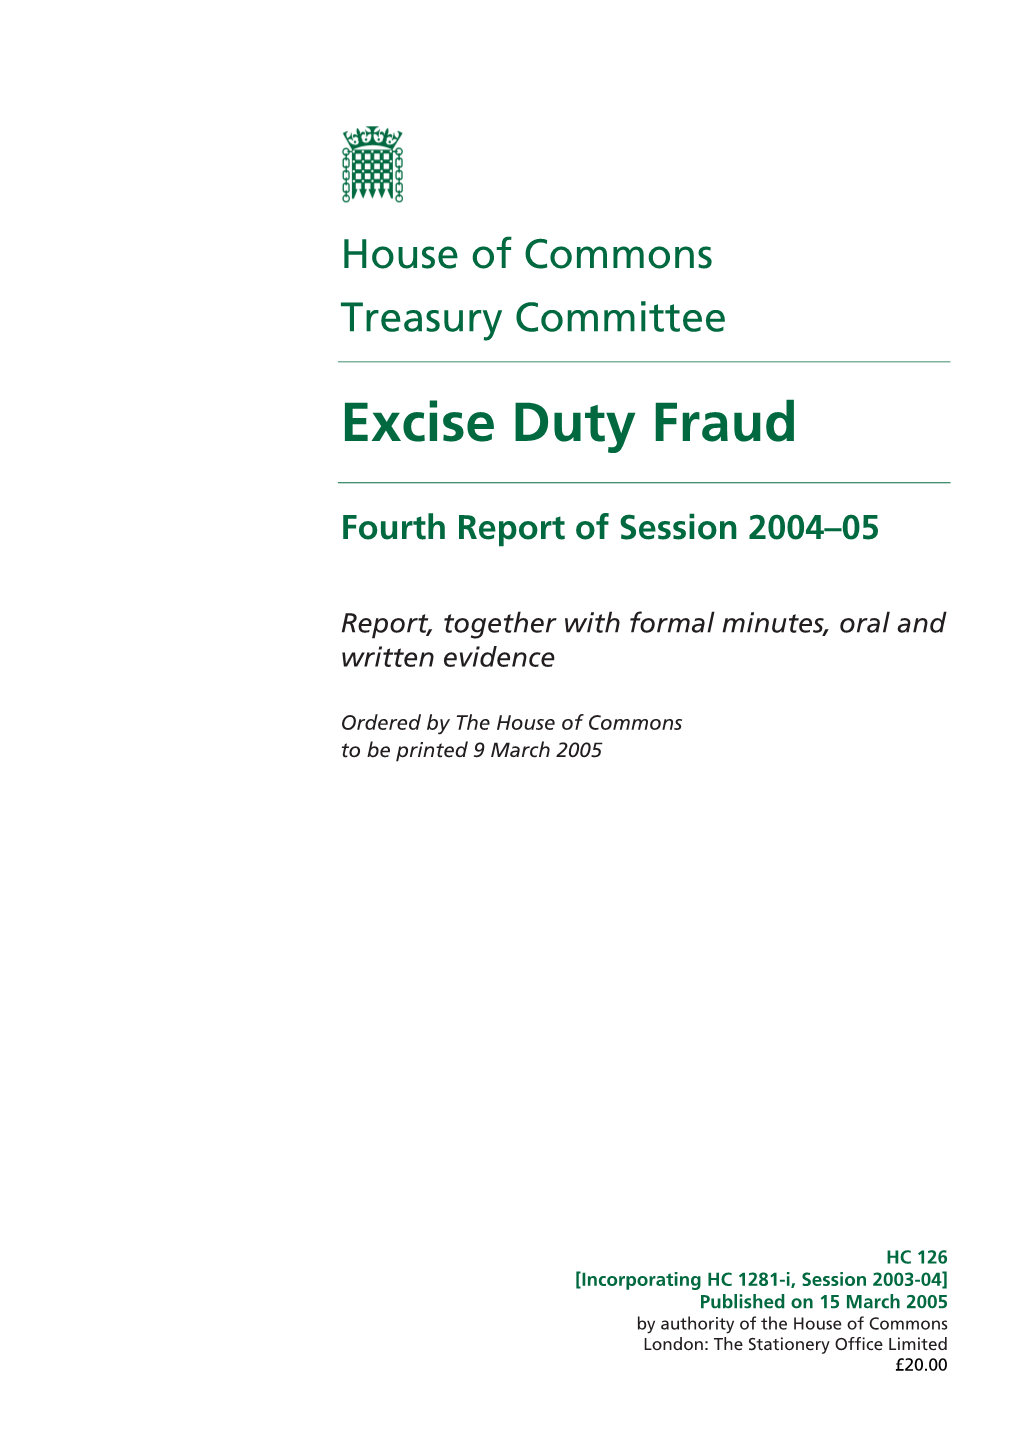 Excise Duty Fraud